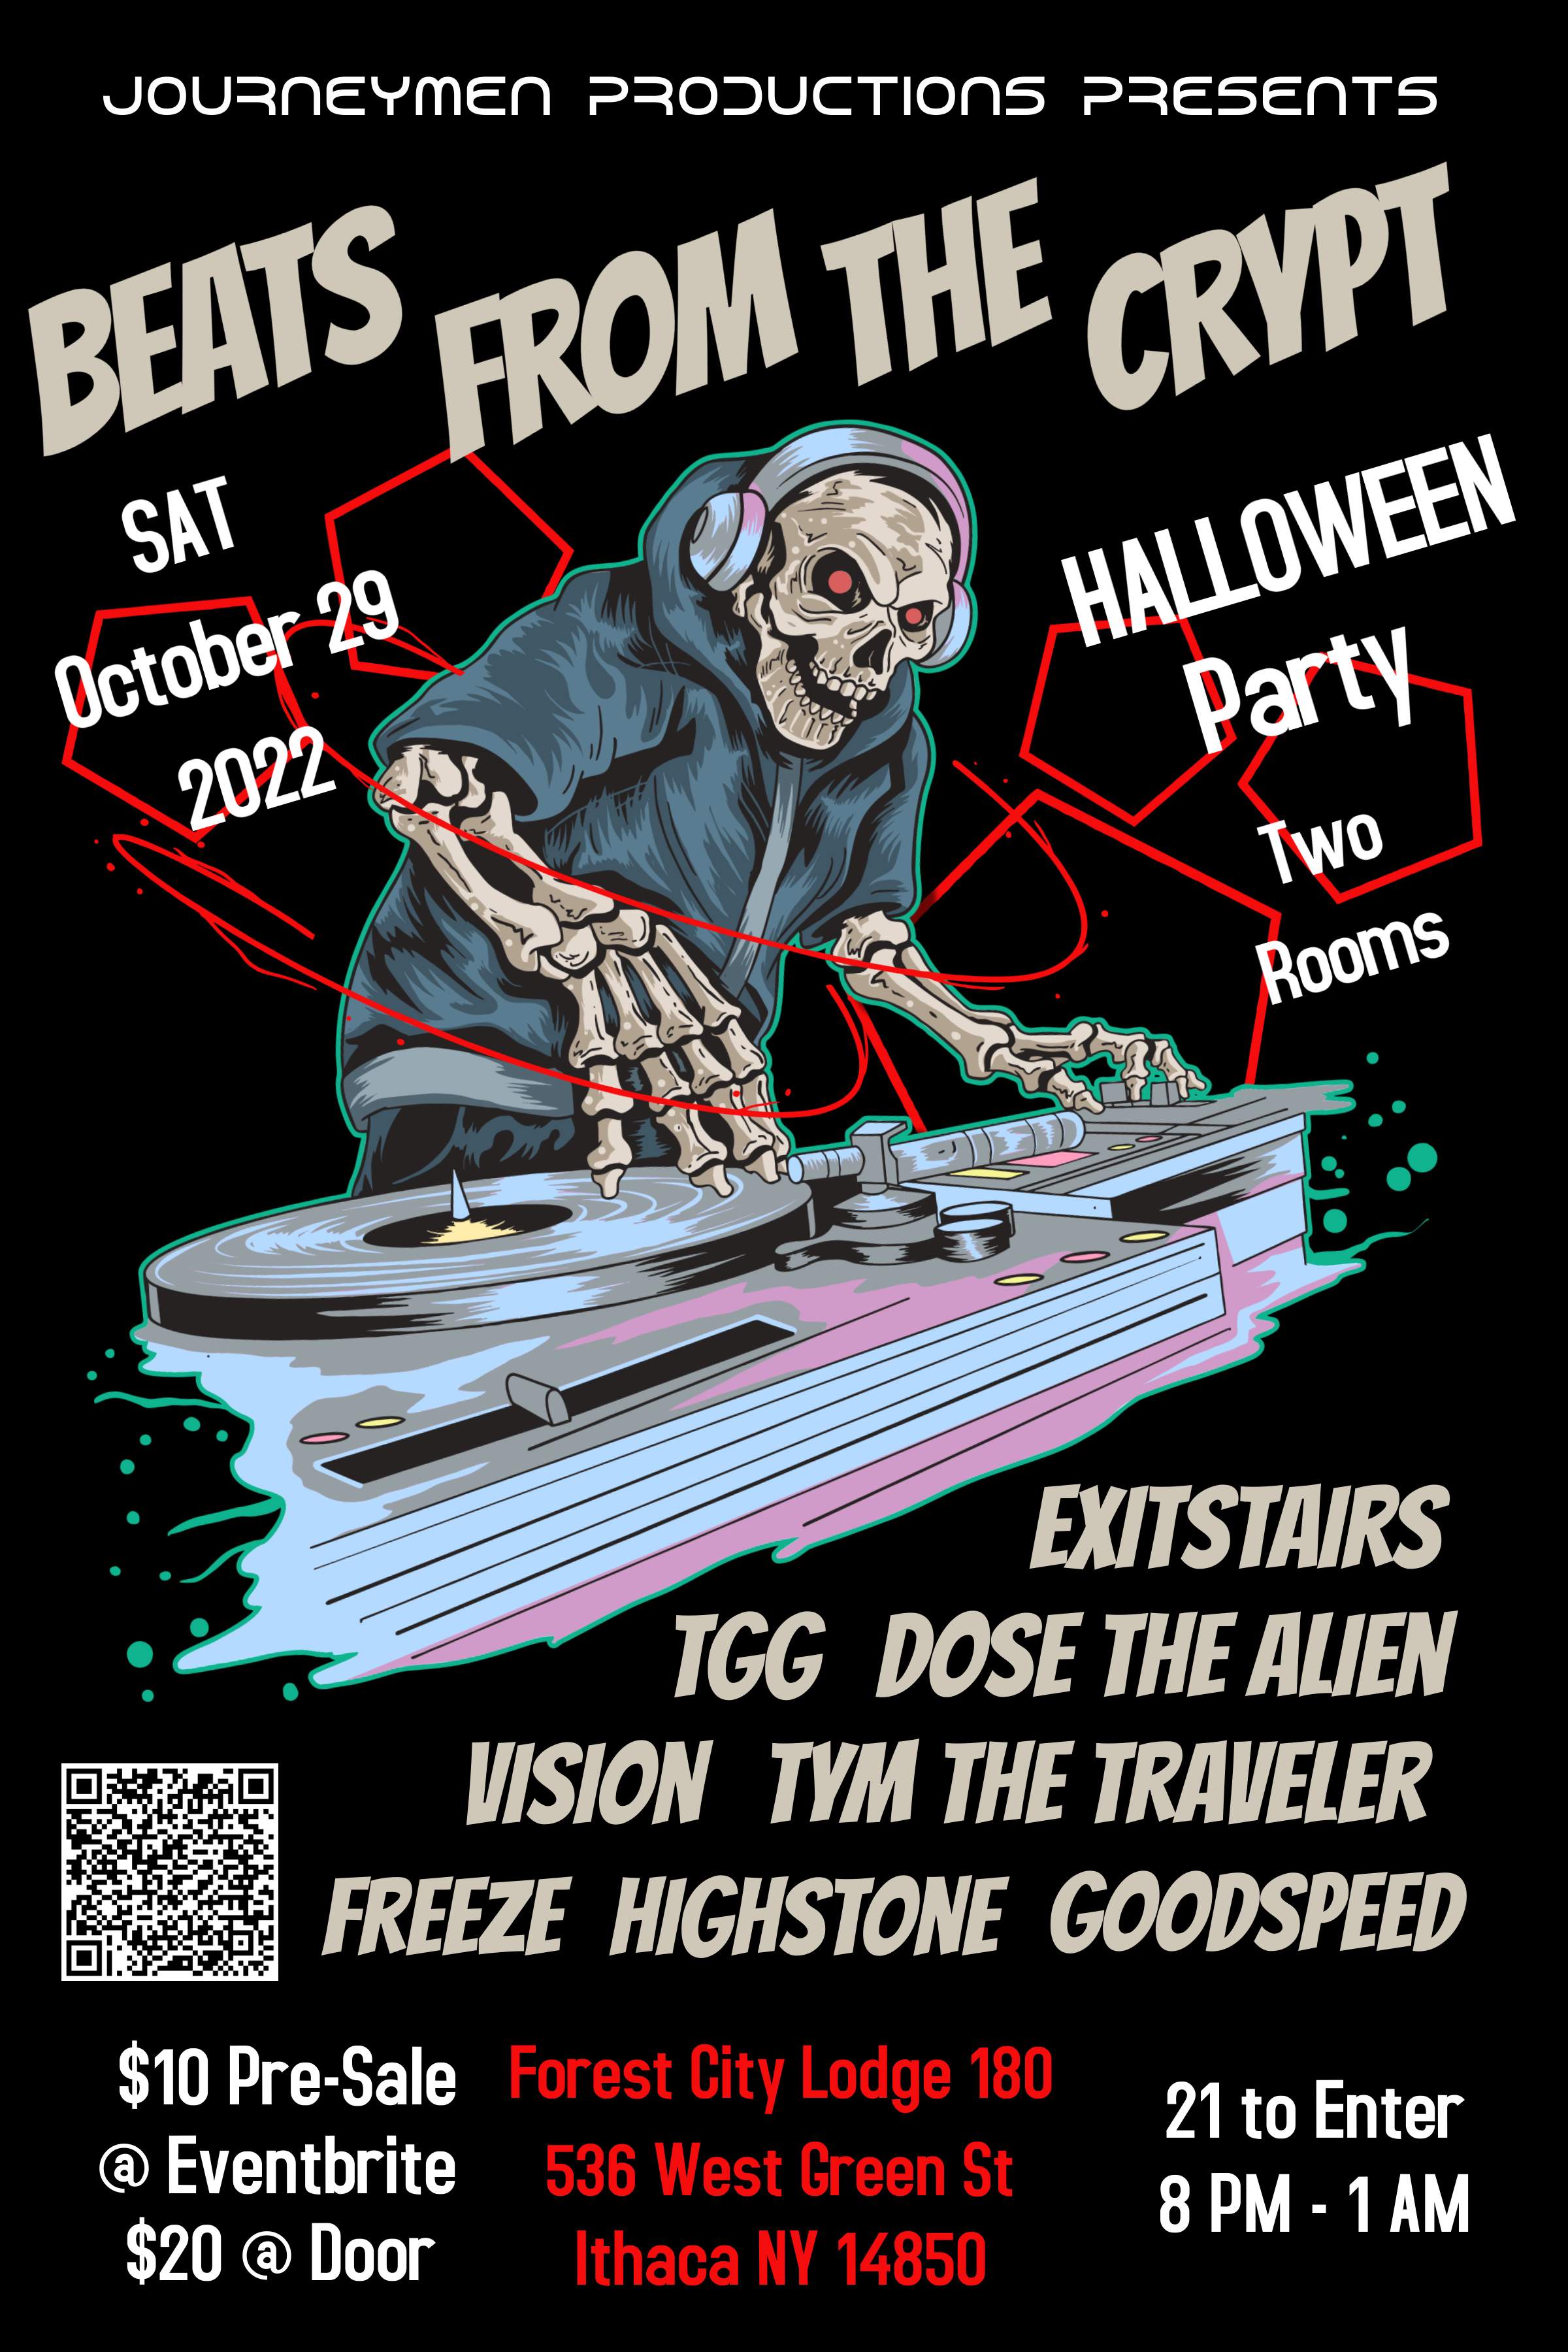 Beats from the Crypt Halloween Party - フライヤー表